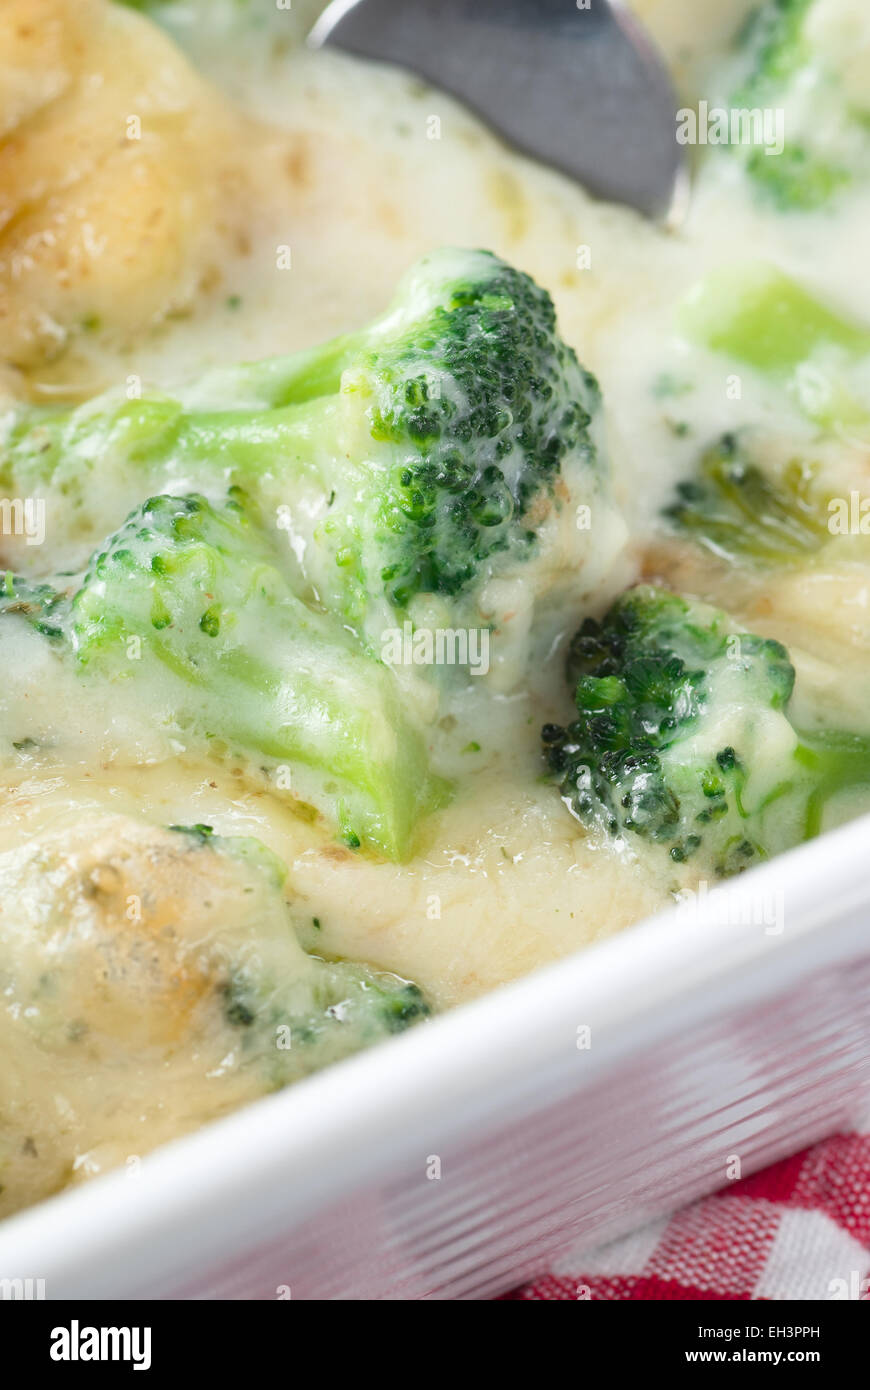 Broccoli gratin with melted cheese. Stock Photo